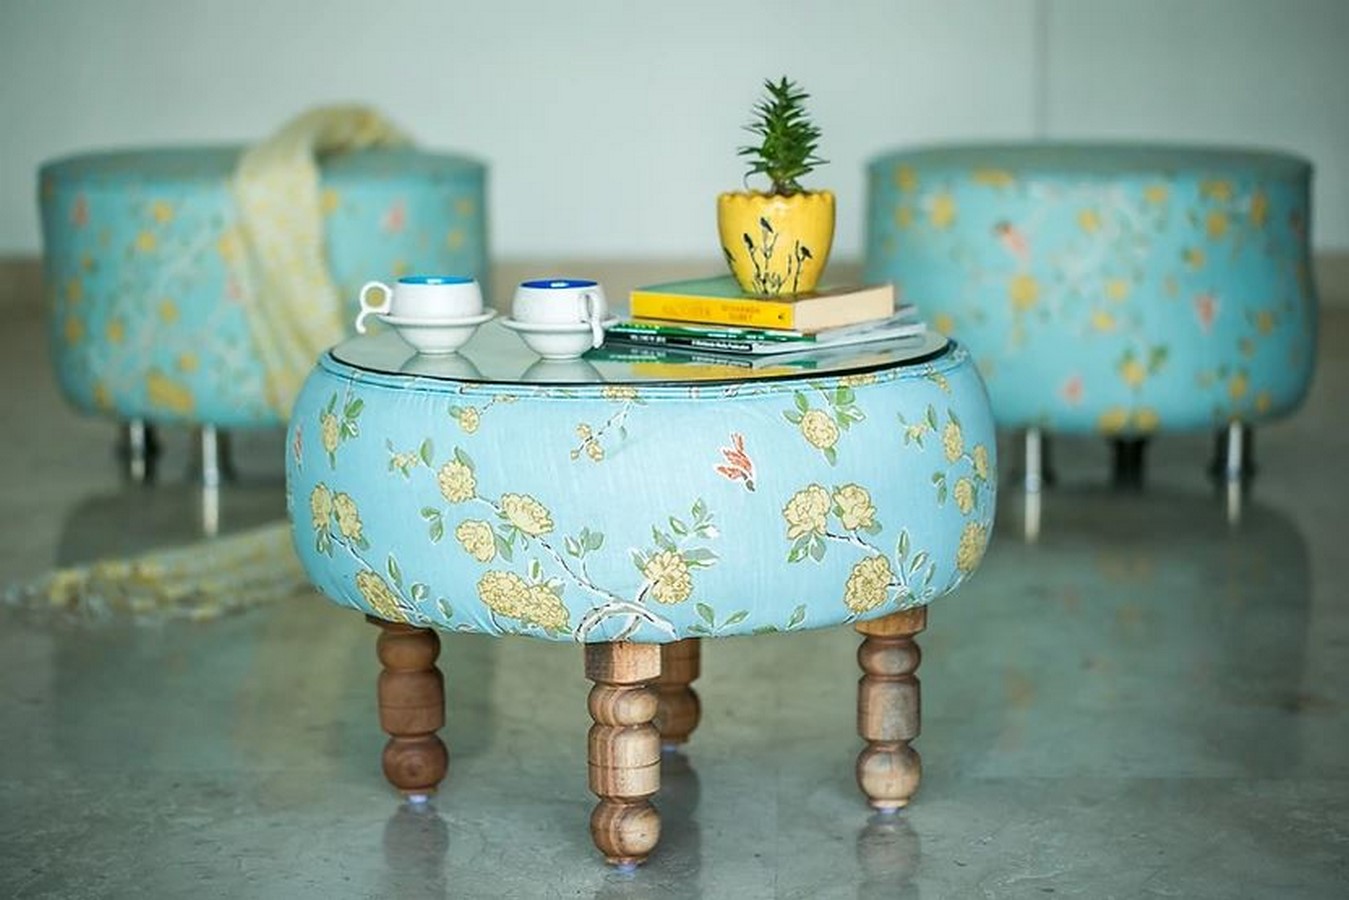 Upcycled furniture – Tyre Pouffes and table - Sheet2